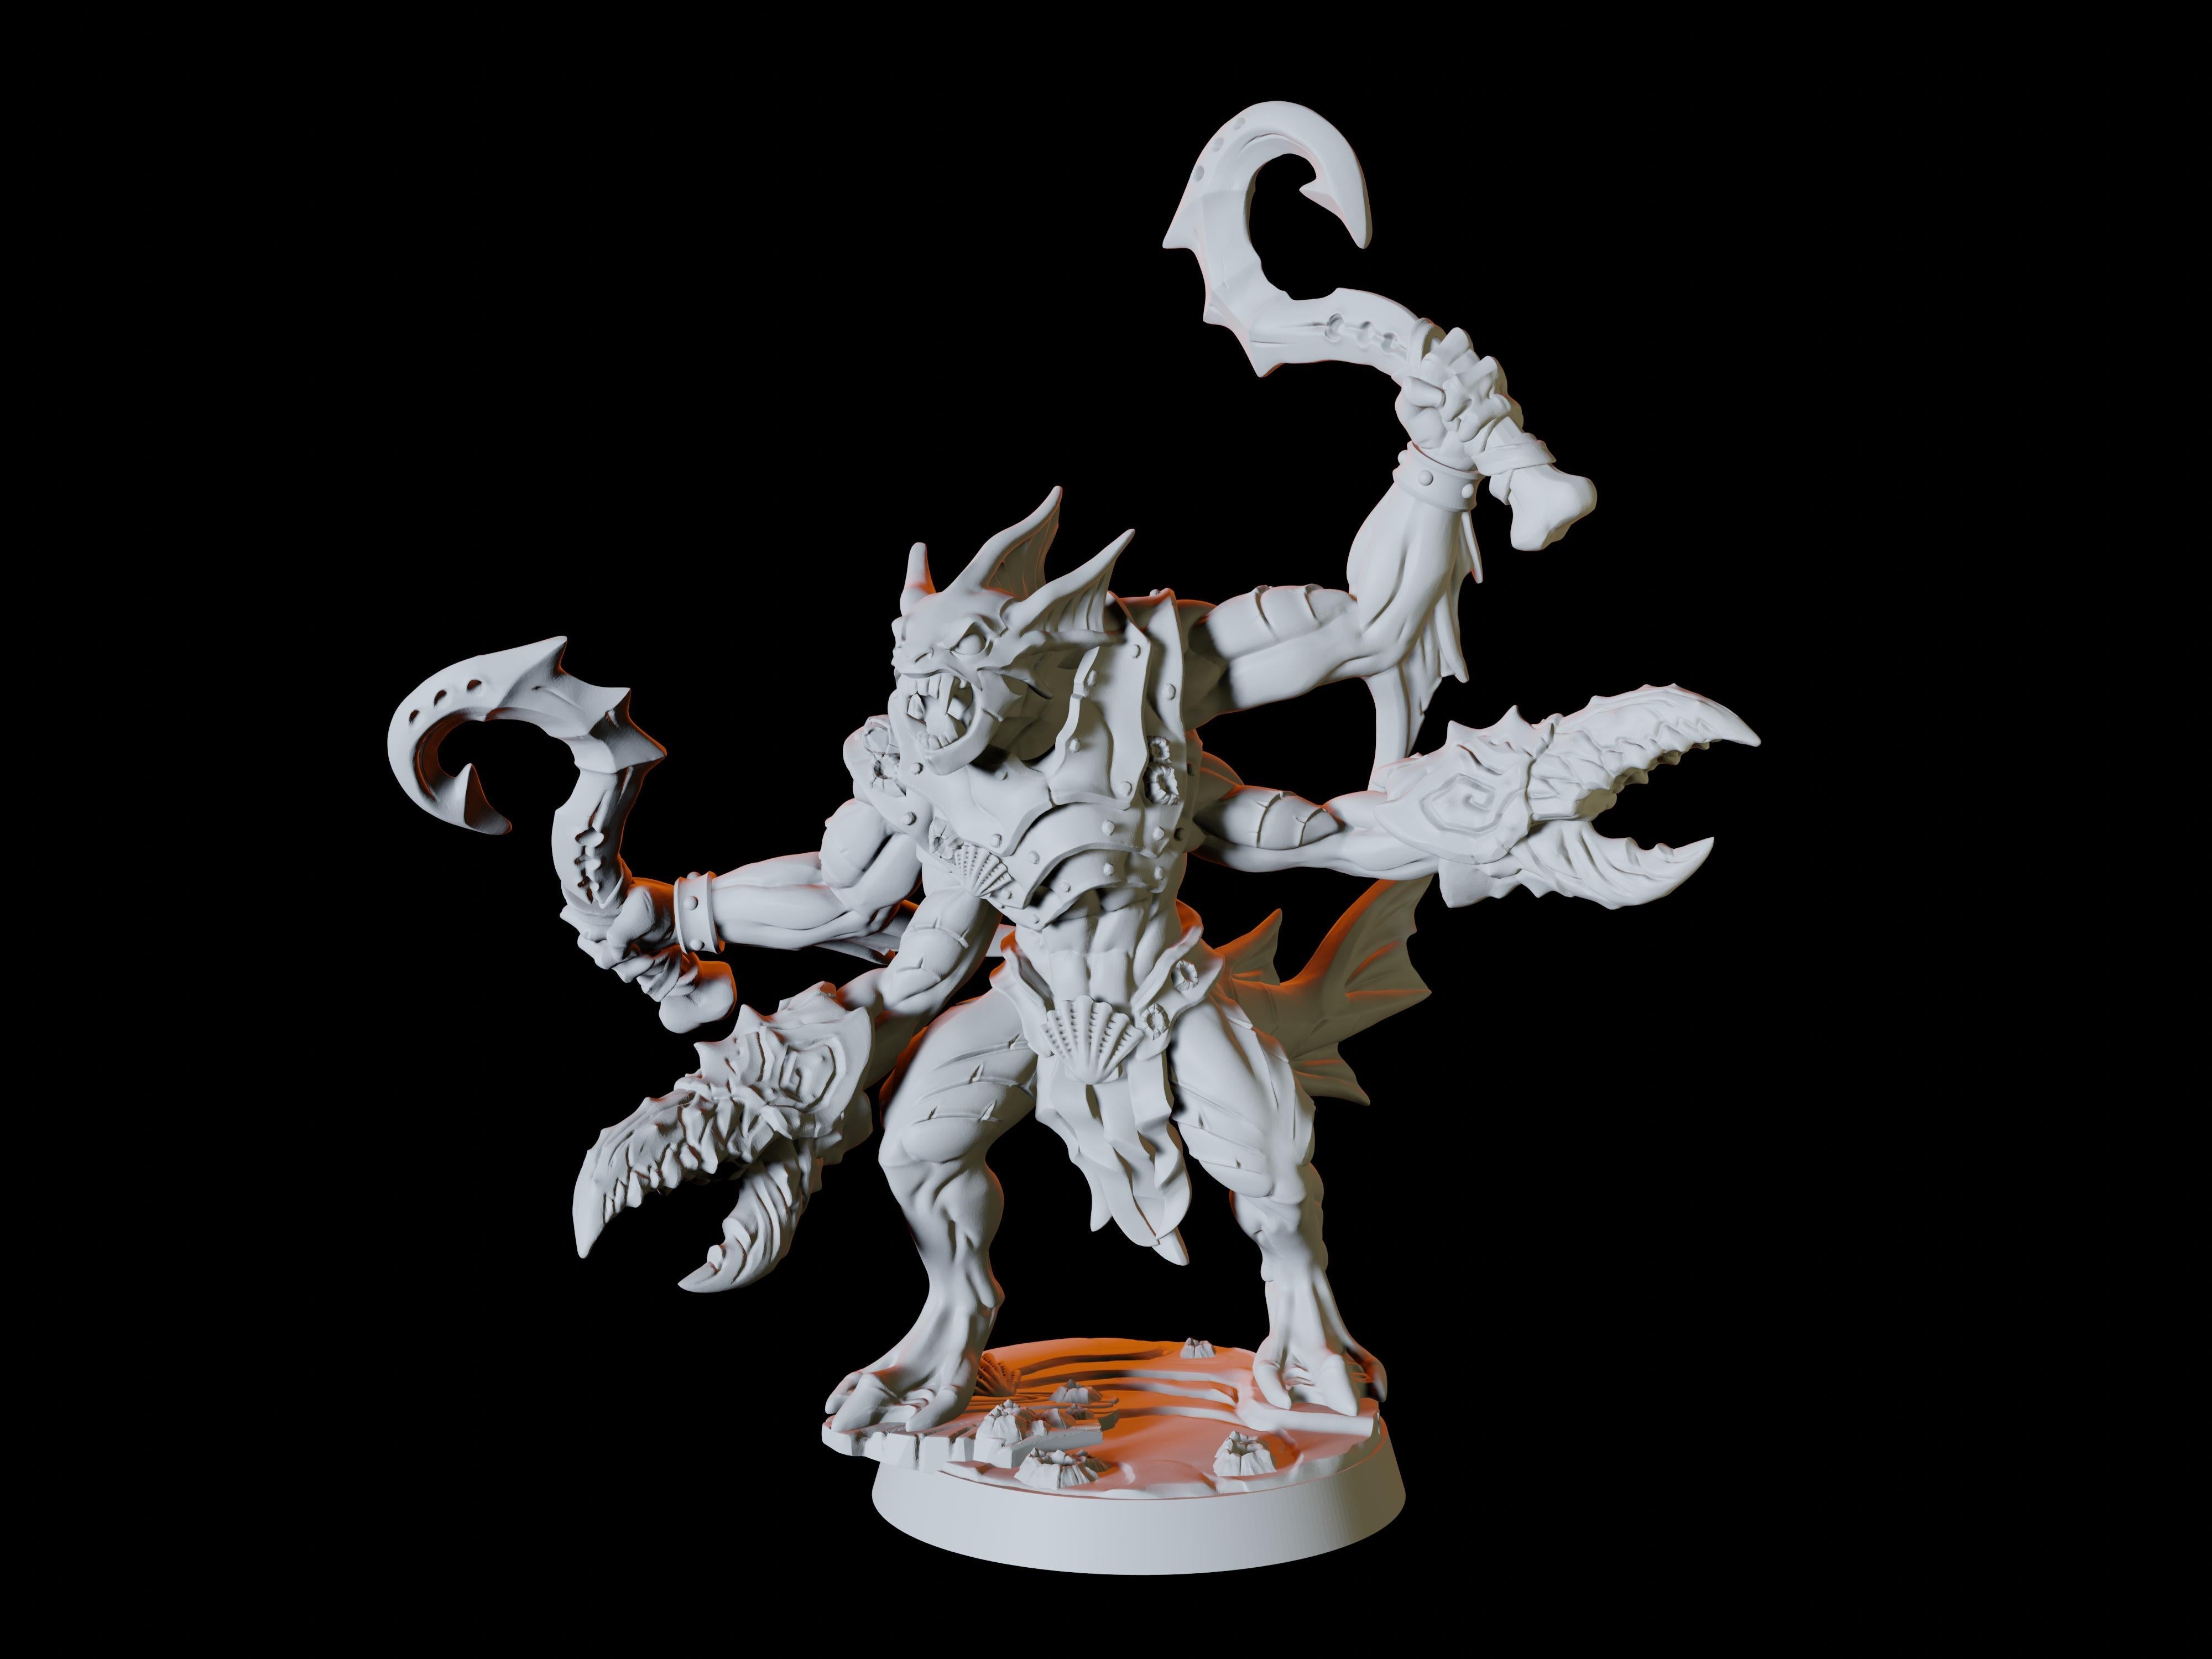 Six Sahuagin or Merrow Miniatures for Dungeons and Dragons - Myth Forged